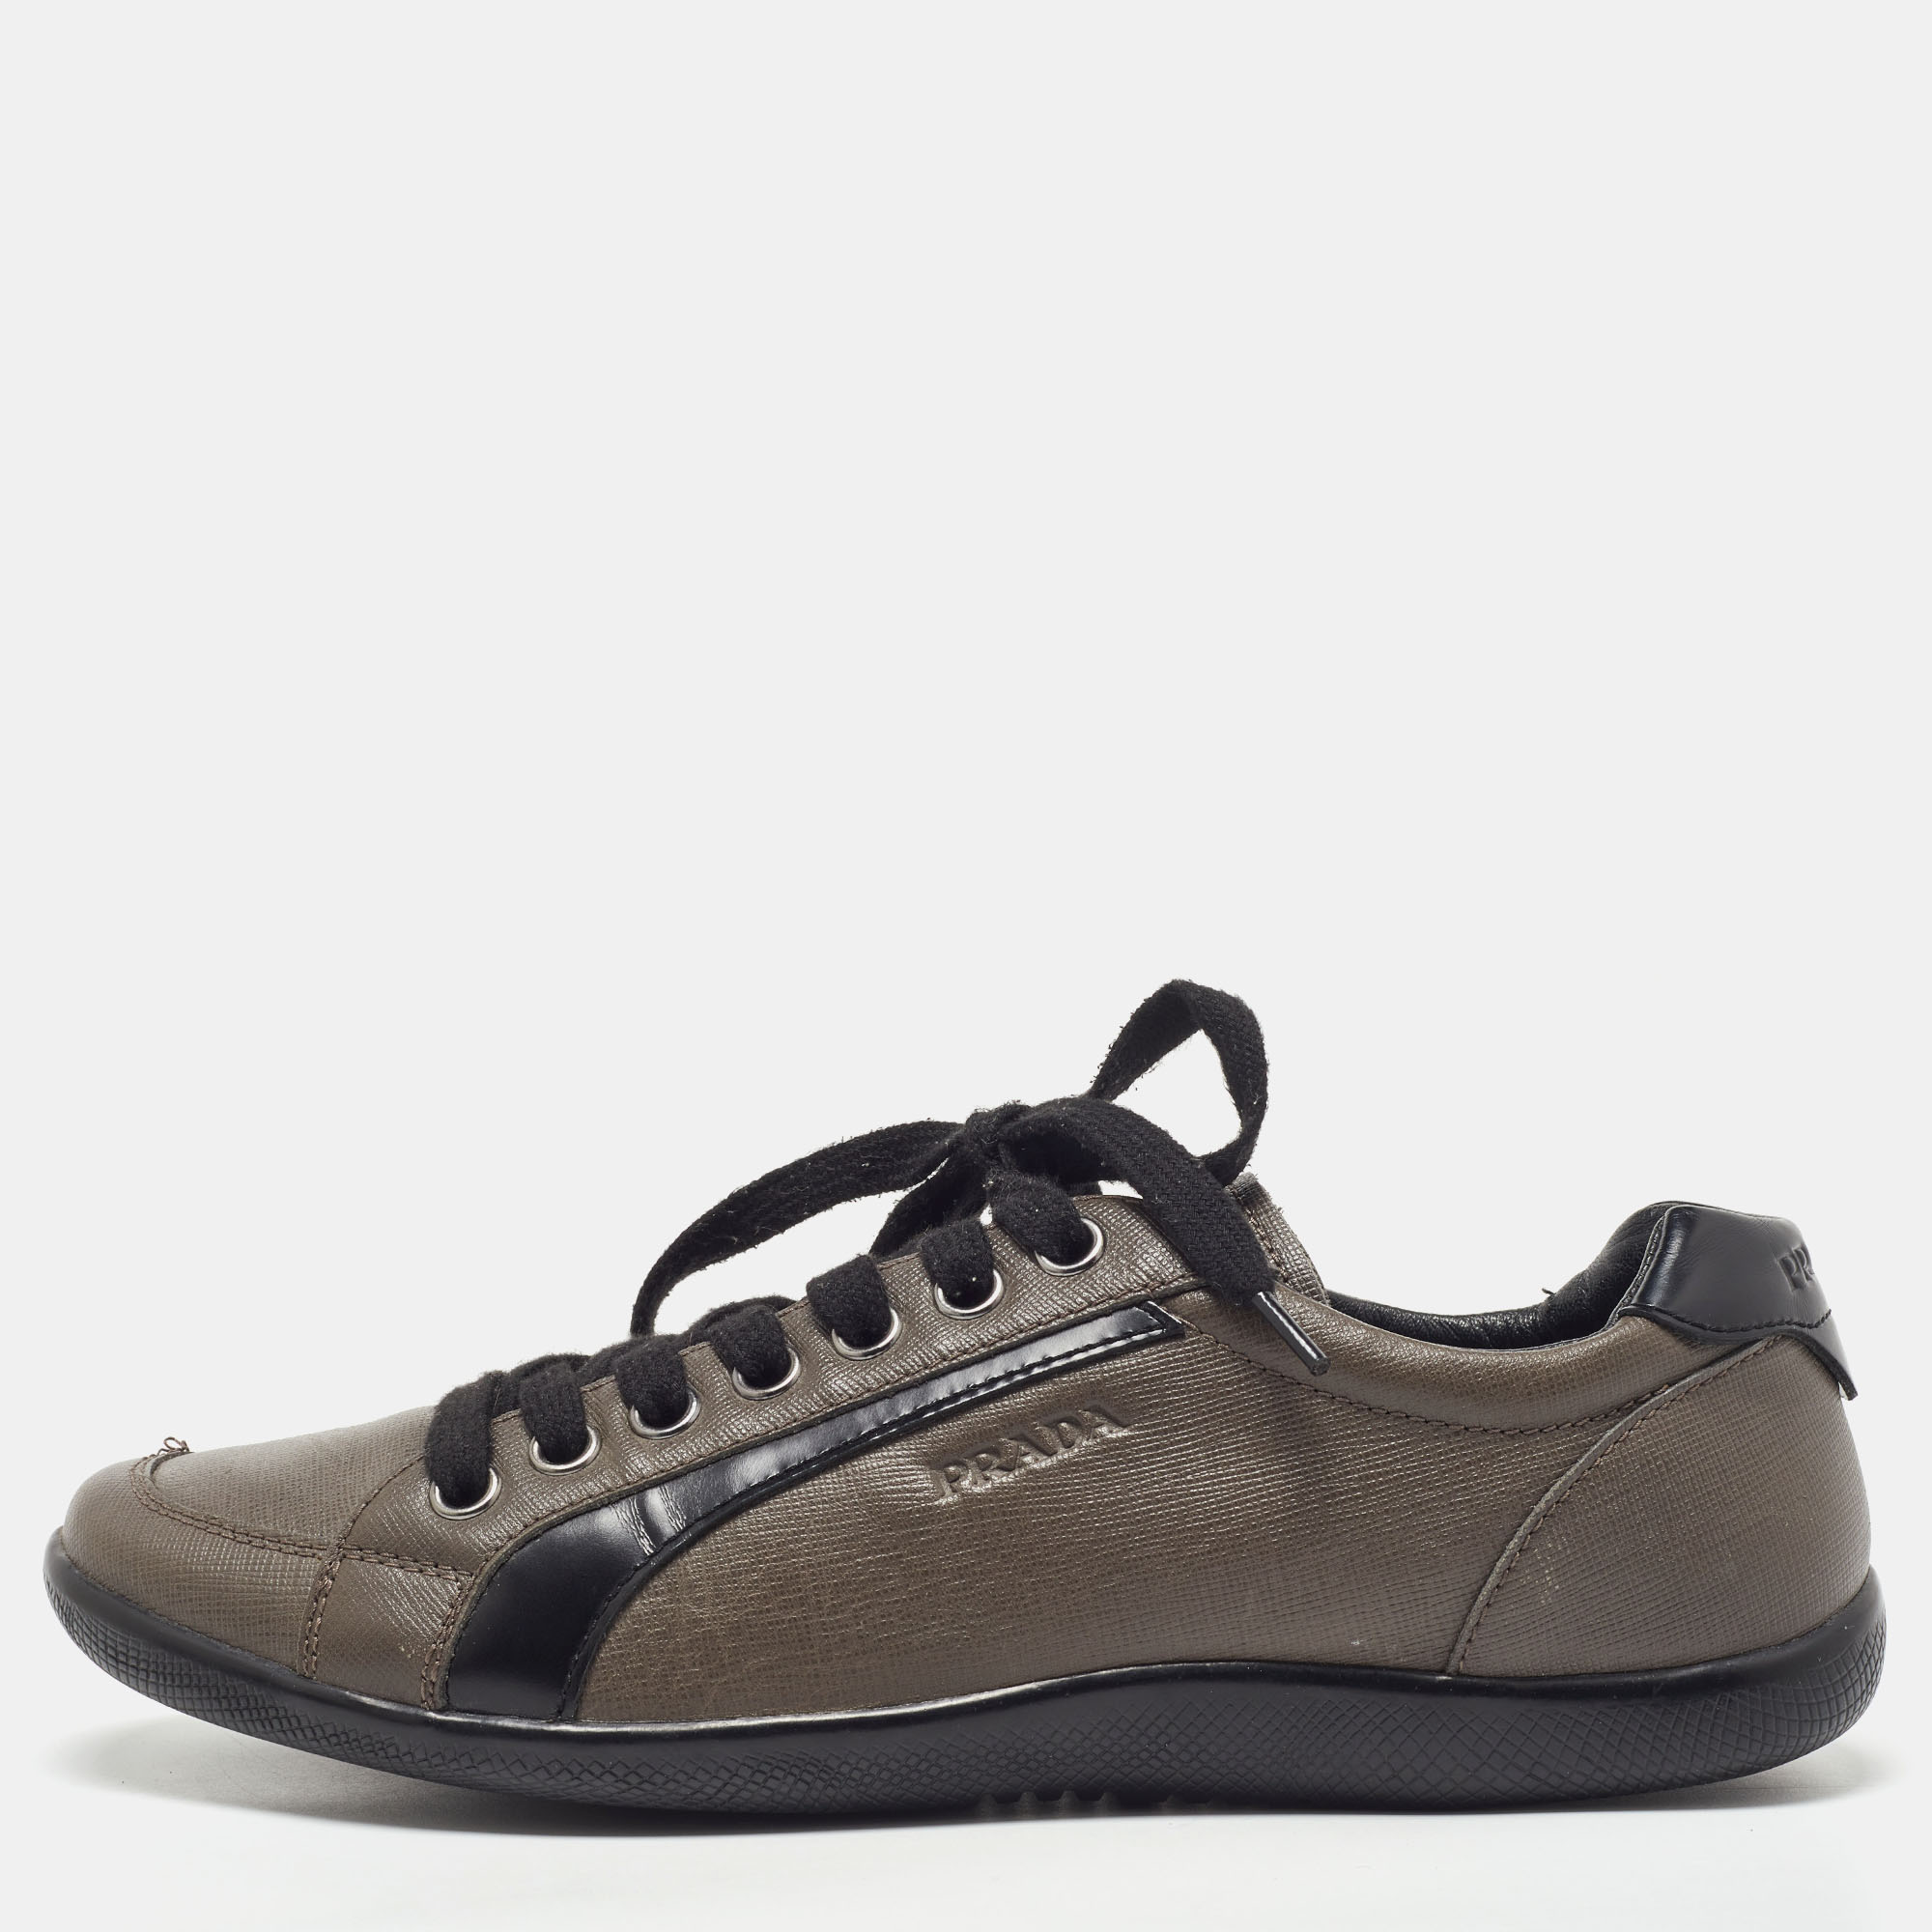 Coming in a classic silhouette these designer sneakers are a seamless combination of luxury comfort and style. These sneakers are designed with signature details and comfortable insoles.